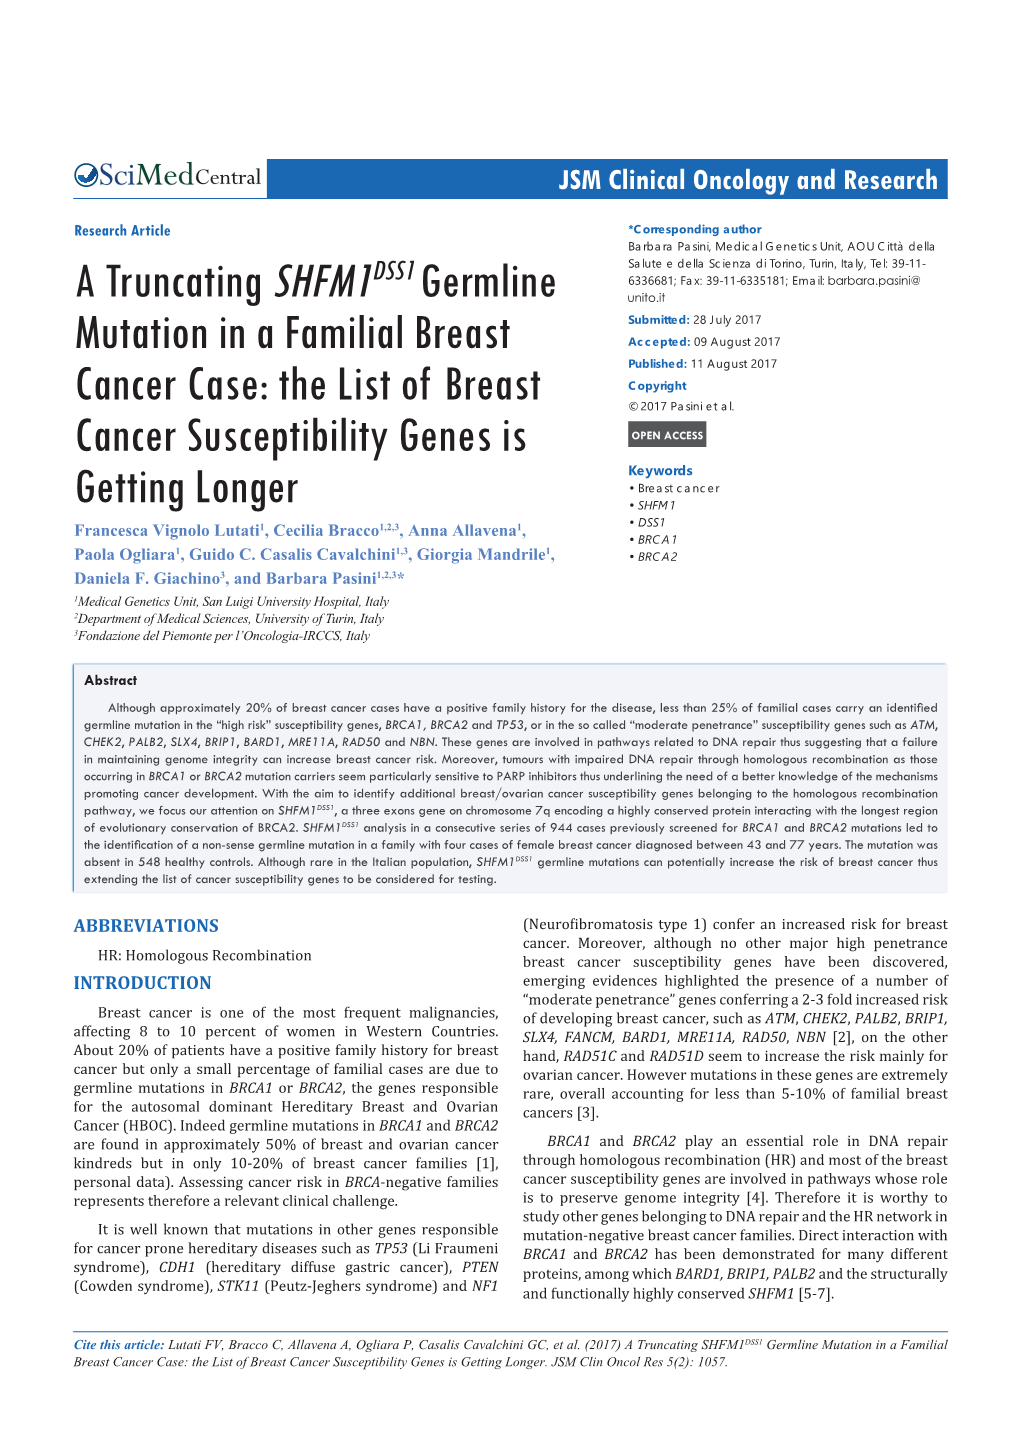 A Truncating SHFM1DSS1 Germline Mutation in a Familial Breast Cancer Case: the List of Breast Cancer Susceptibility Genes Is Getting Longer